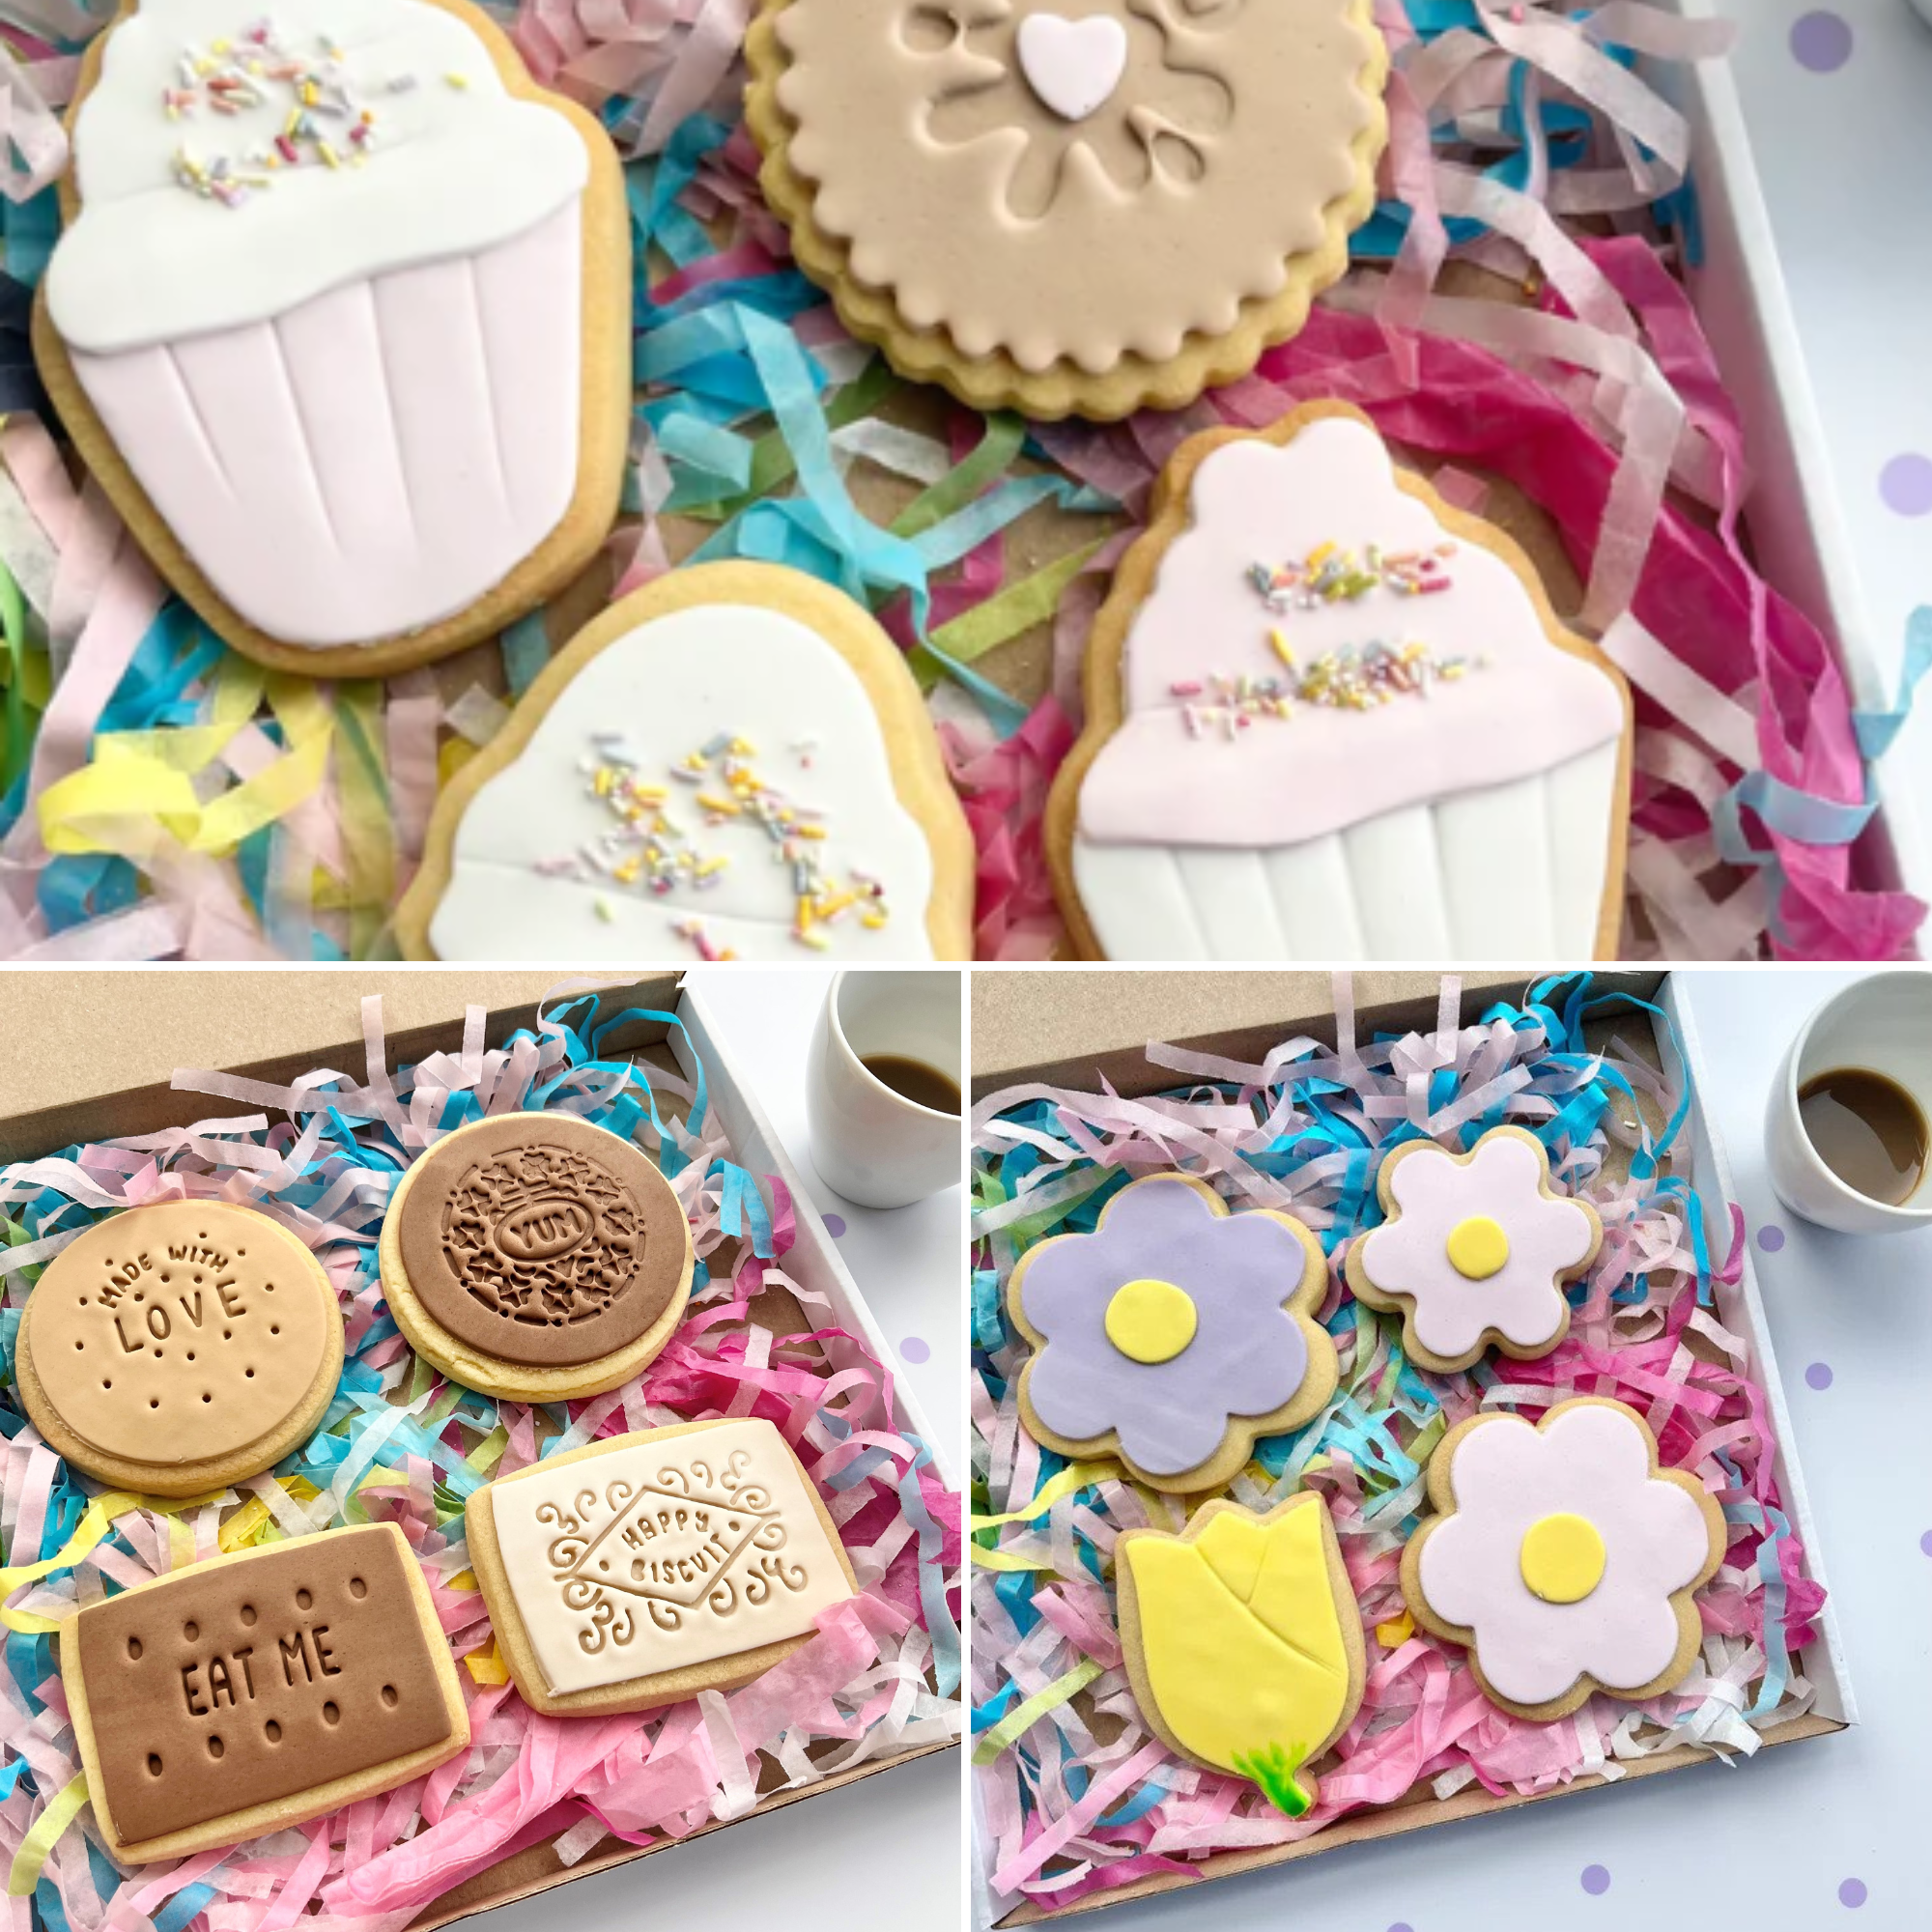 The Collection – The Bake Off Box